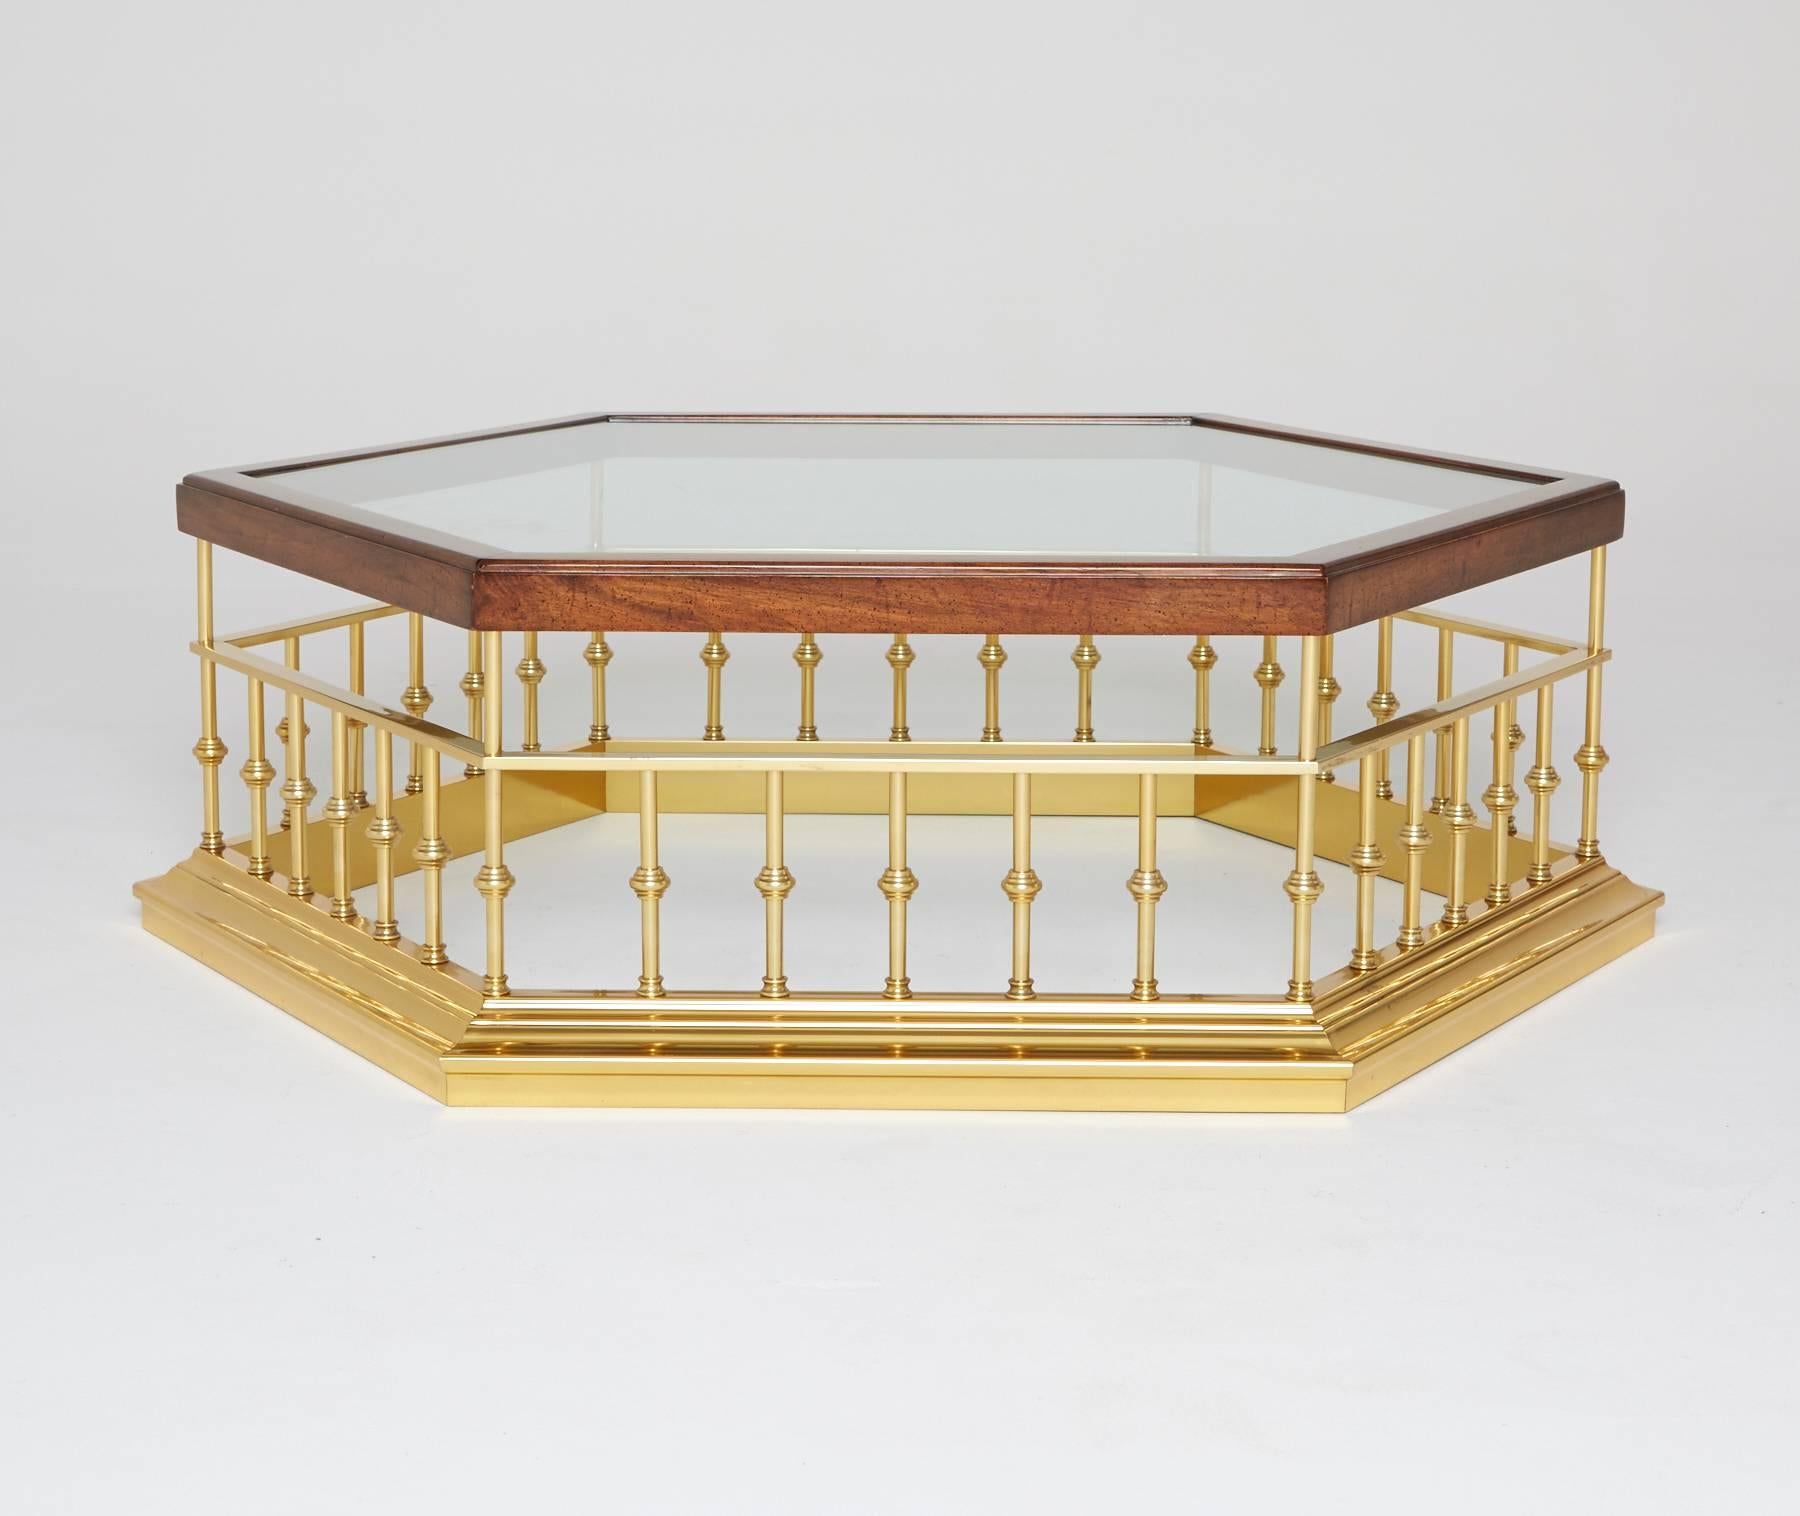 A hexagonal glass surface is inset into the walnut border, elevated by an ornamental balustrade brass frame. Perfect for use as a coffee table, cocktail table, or even as a display platform. 

Our adoration for the hexagon is deeply rooted: From